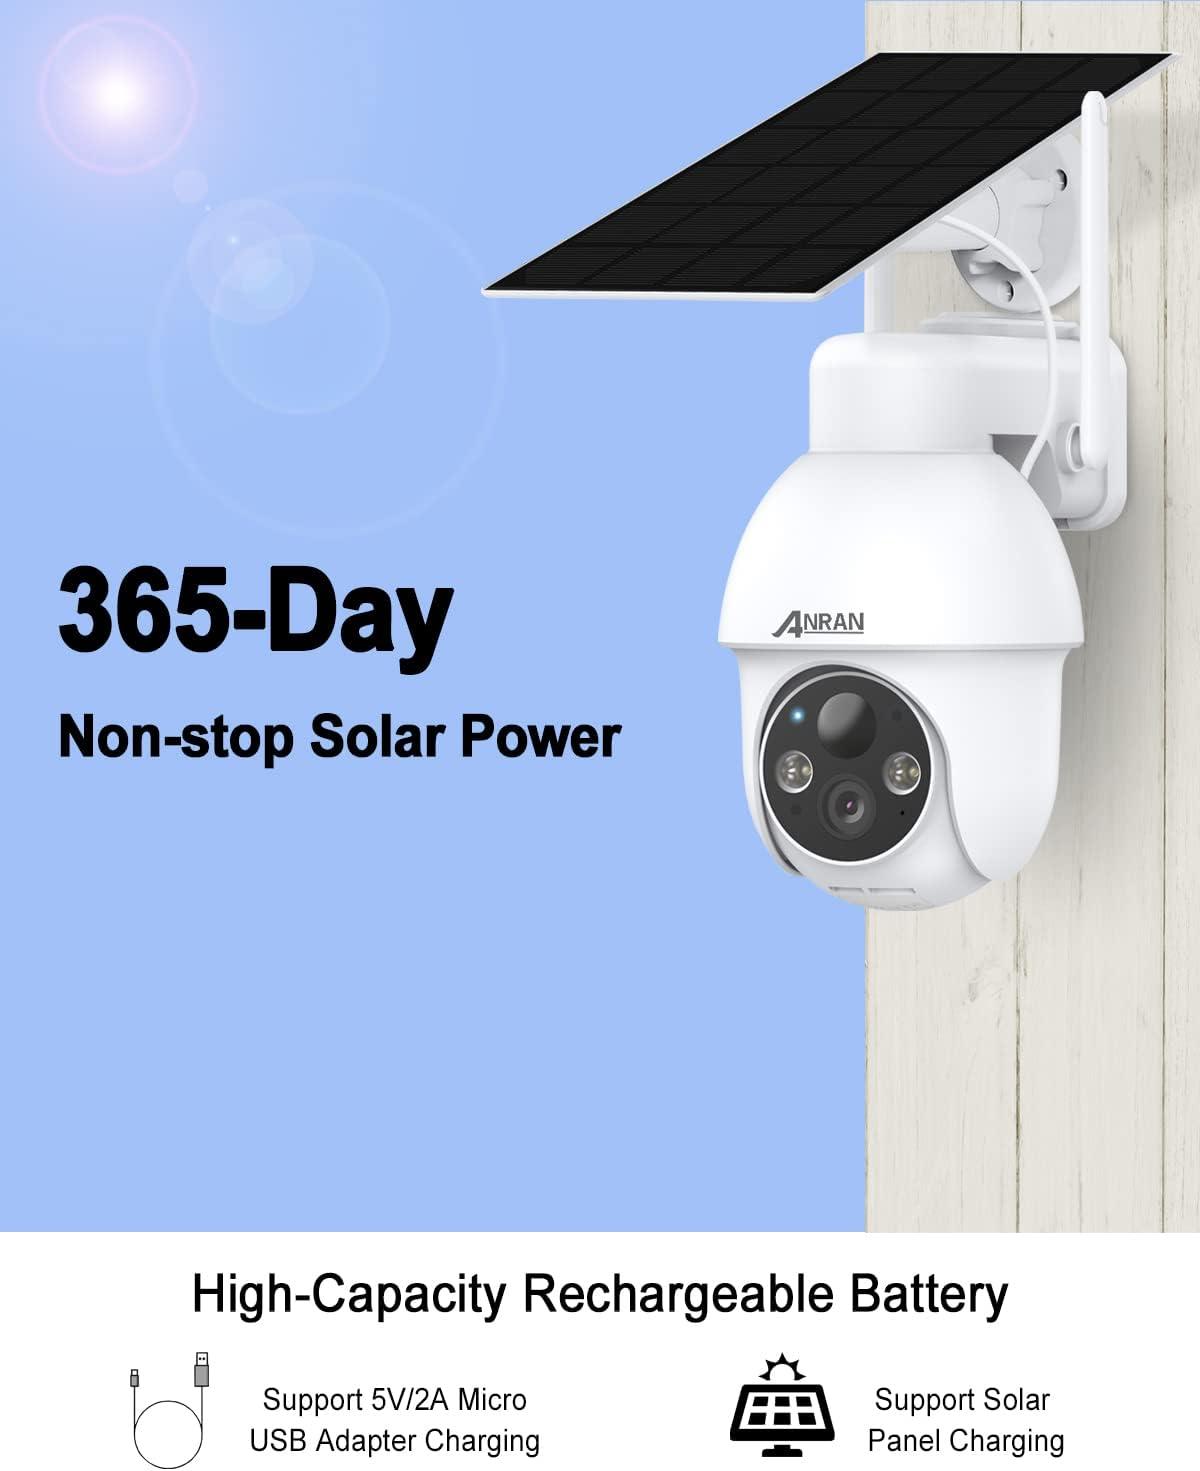 REOLINK Security Camera Wireless Outdoor, Pan Tilt Solar Powered, 5MP 2K+  Color Night Vision, 2.4/5GHz WiFi, 2-Way Talk, Works with Alexa/Google